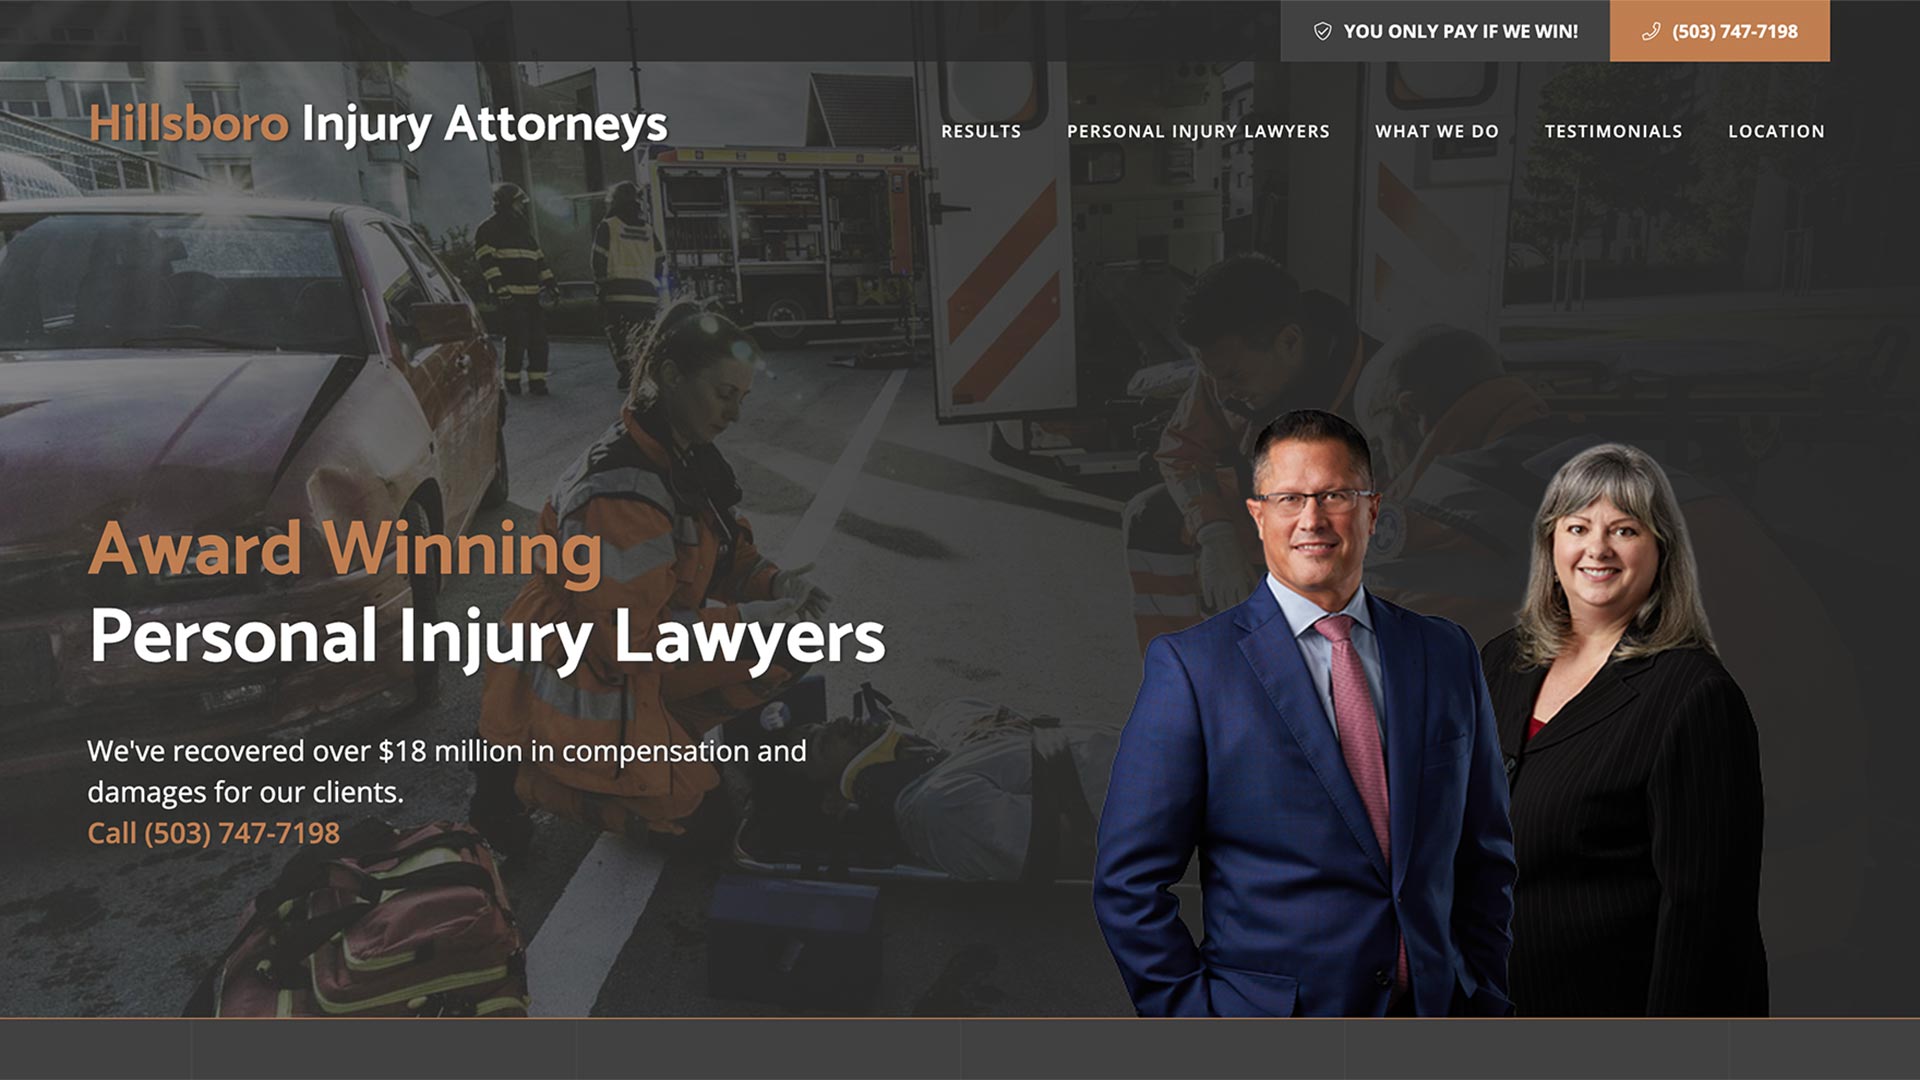 Law Firm Landing Page Example: Hillsboro Injury Attorneys Website